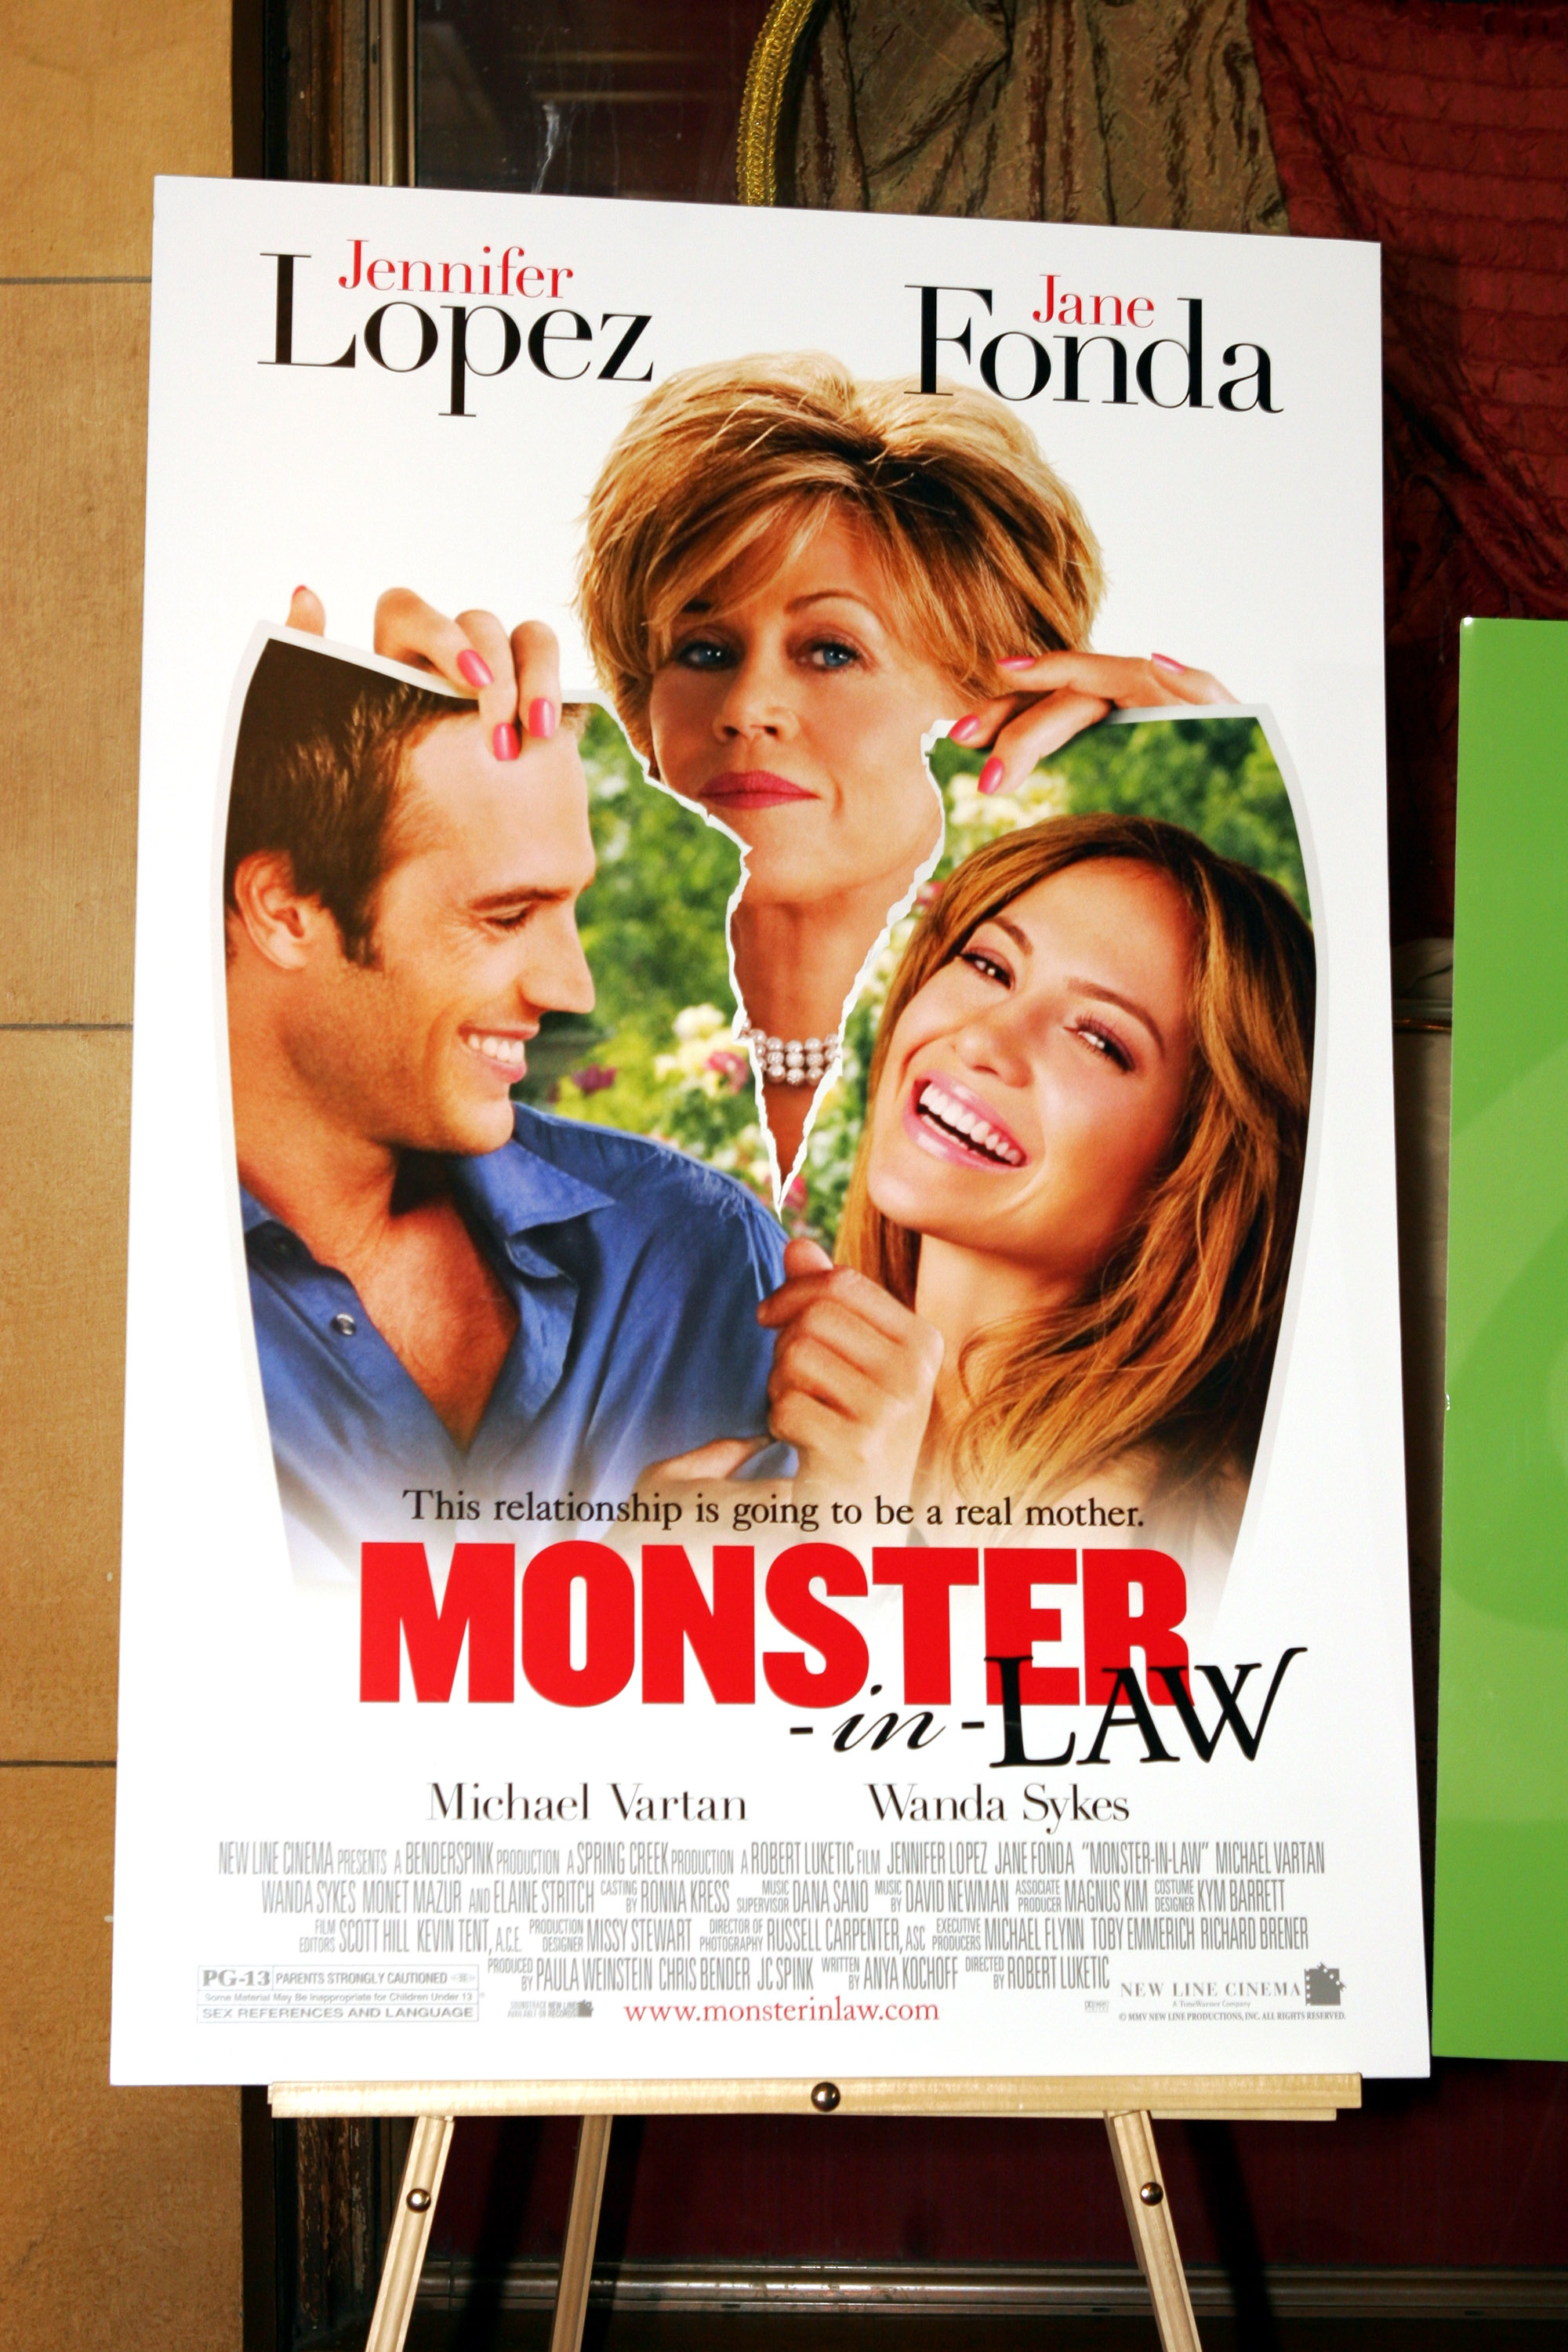 Signage for the east coast premiere of "Monster-in-Law" featuring Jane Fonda and Jennifer Lopez as seen on May 5, 2005 in Atlanta, Georgia.